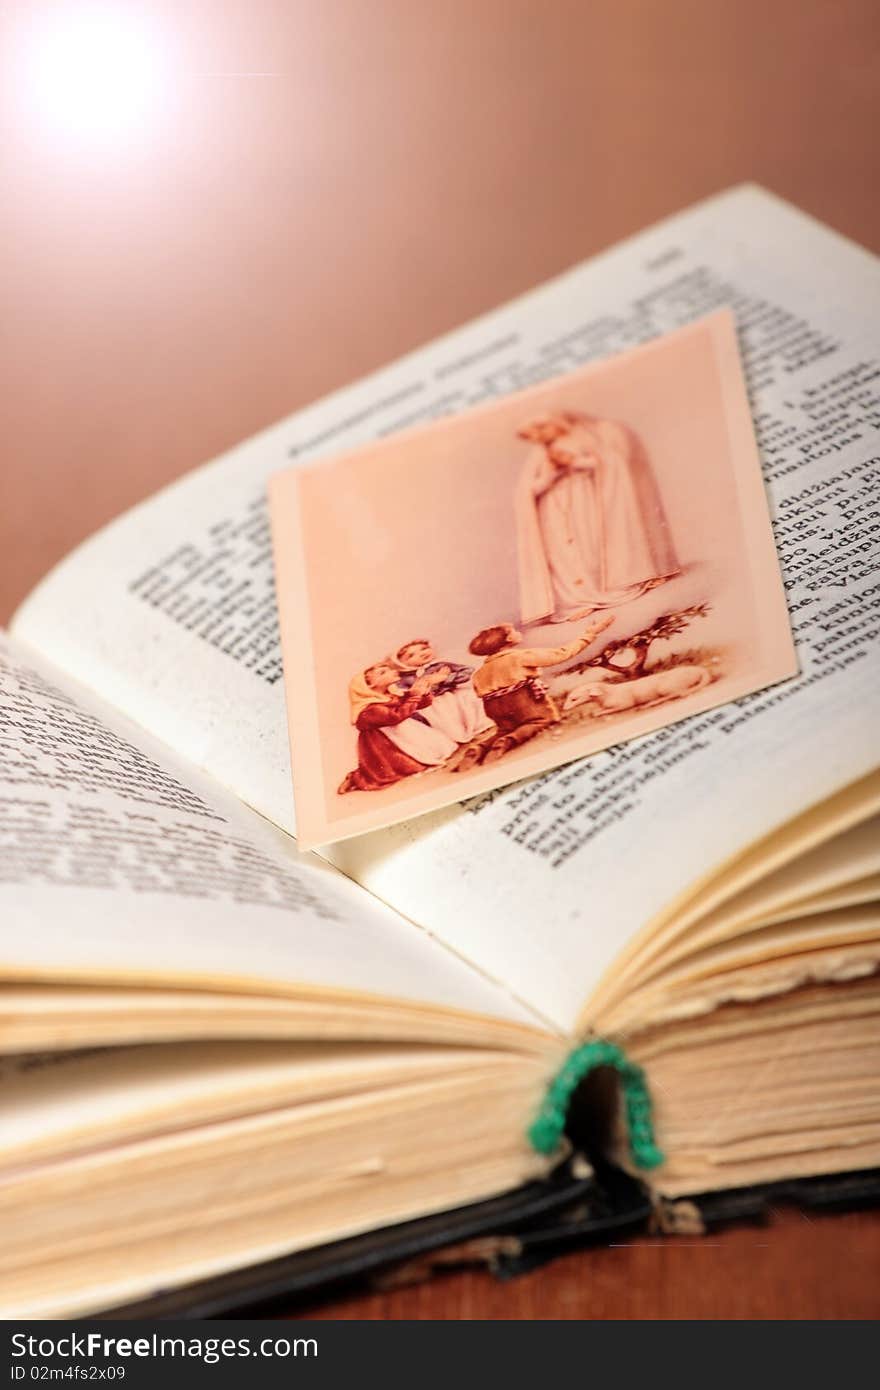 Little picture of children praying to Virgin Marry put between pages of old prayer-book. Little picture of children praying to Virgin Marry put between pages of old prayer-book